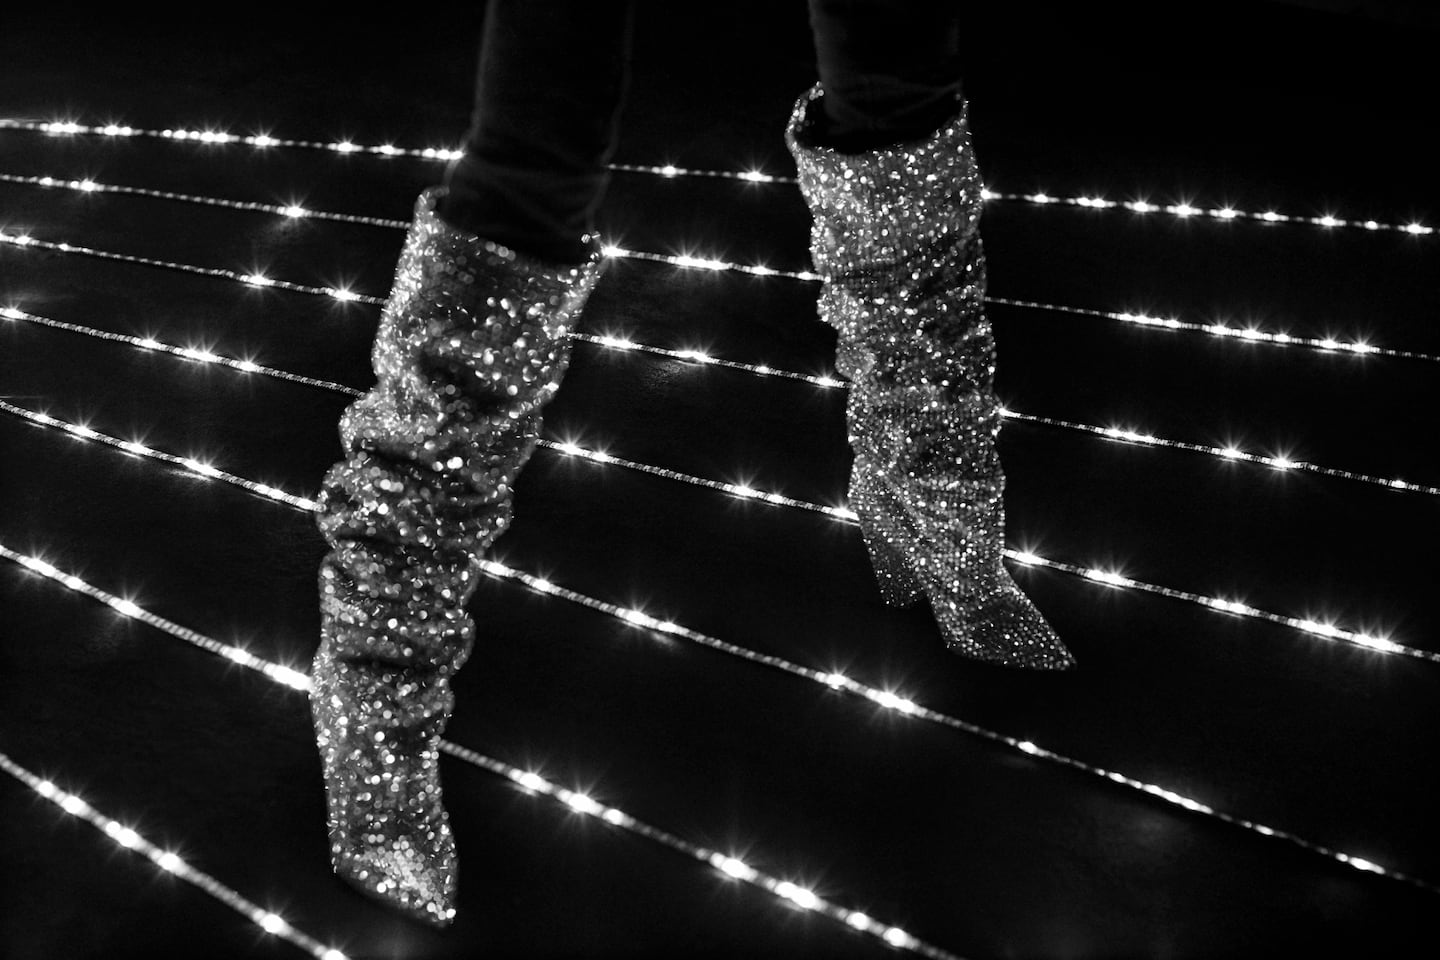 Saint Laurent boots being auctioned in FHCM's benefit for Sidaction.